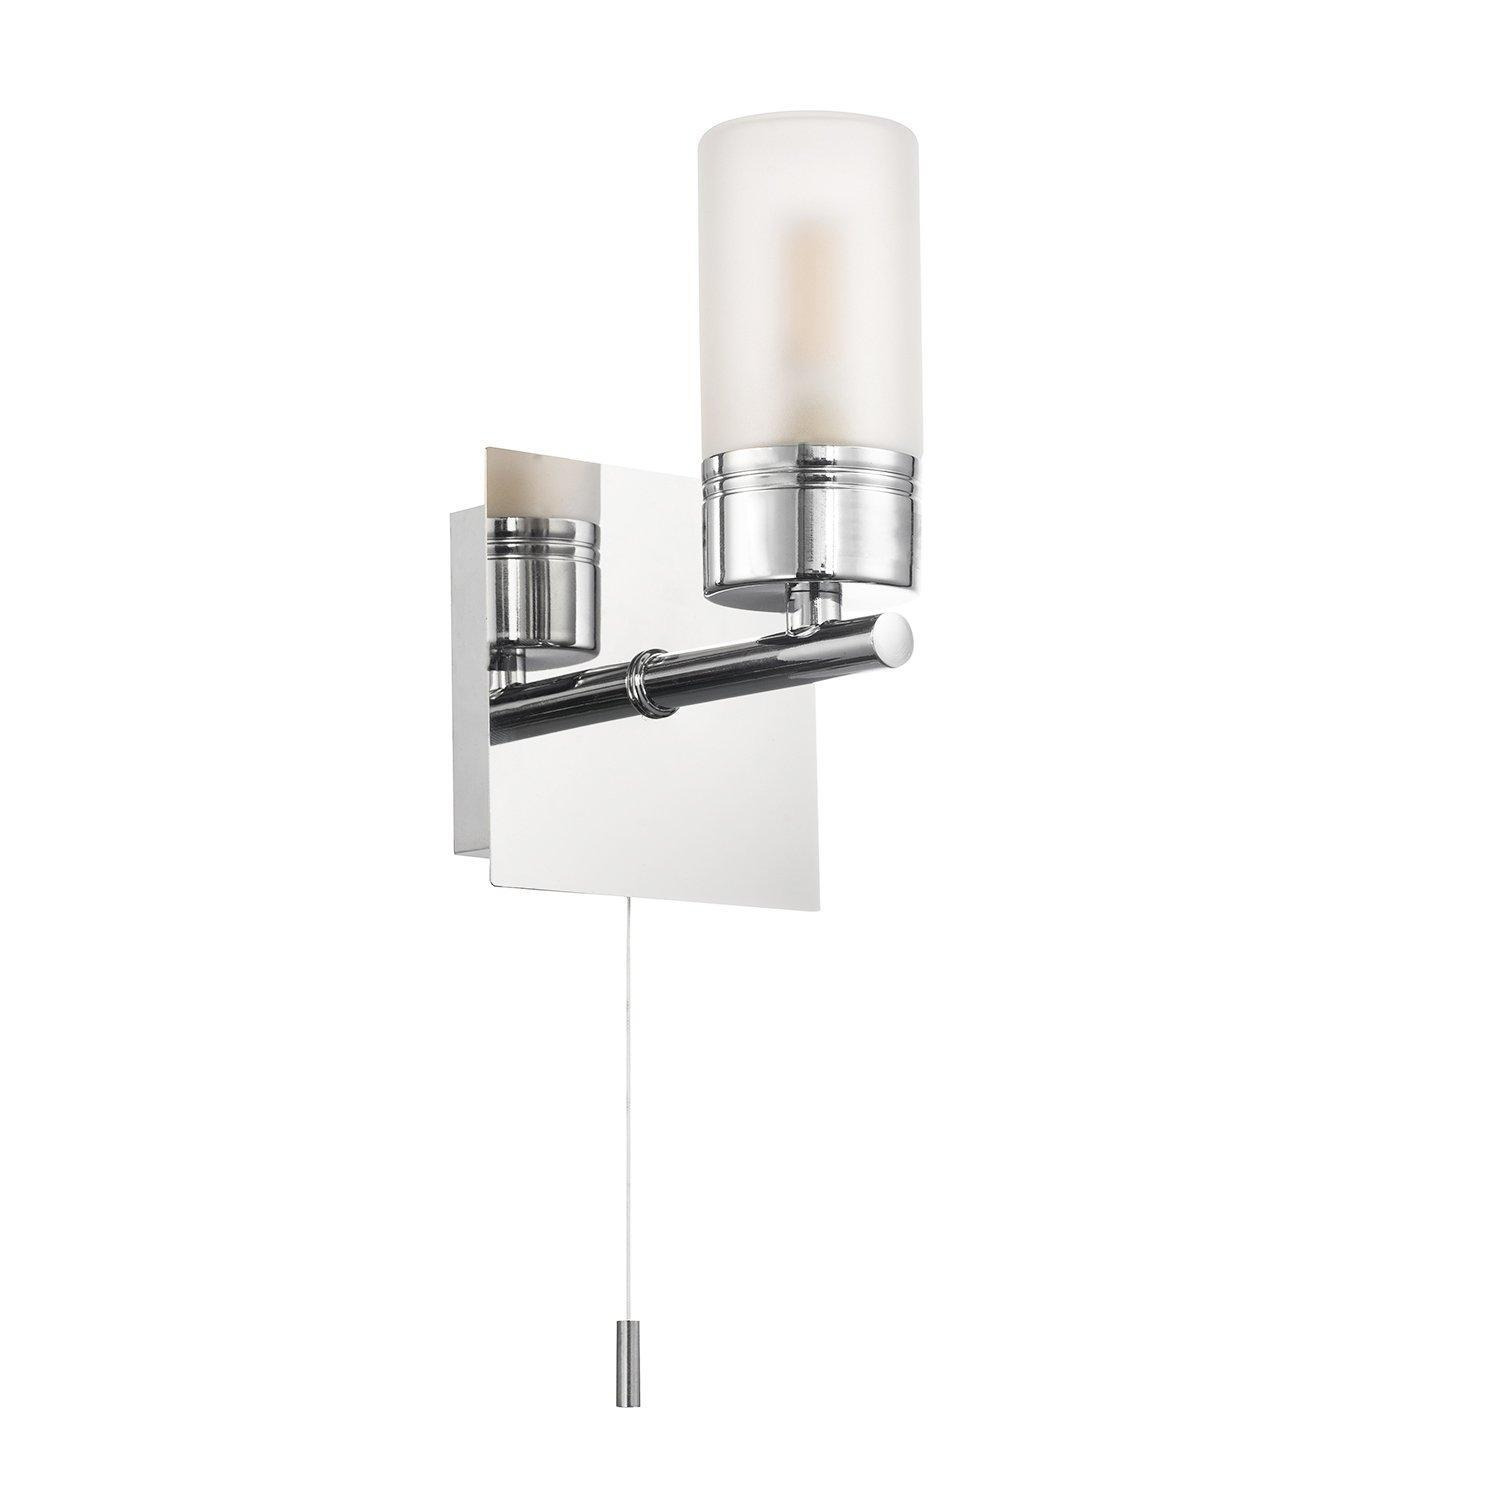 Compact Designer IP44 Rated Bathroom Wall Light Fitting with Tubular Glass Shade - image 1